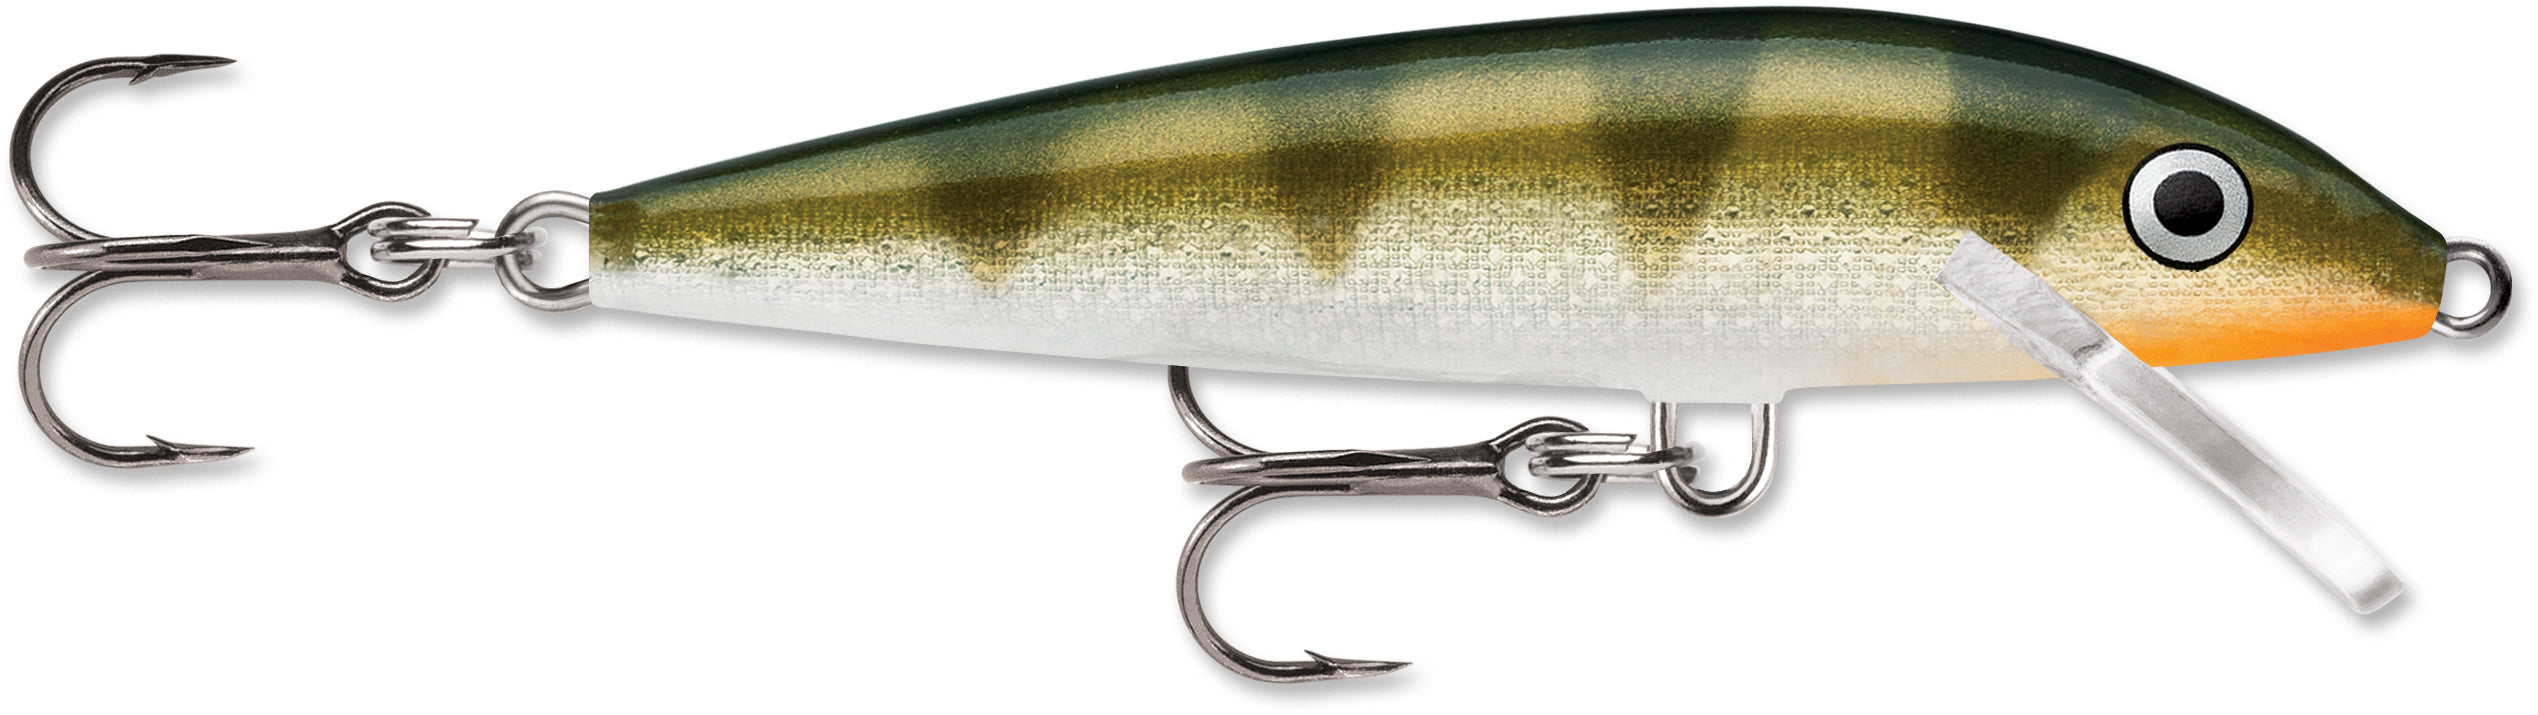 Rapala Original Floating Size 7 Fishing Lure Silver Fluorescent Chartreuse  F07sf for sale online